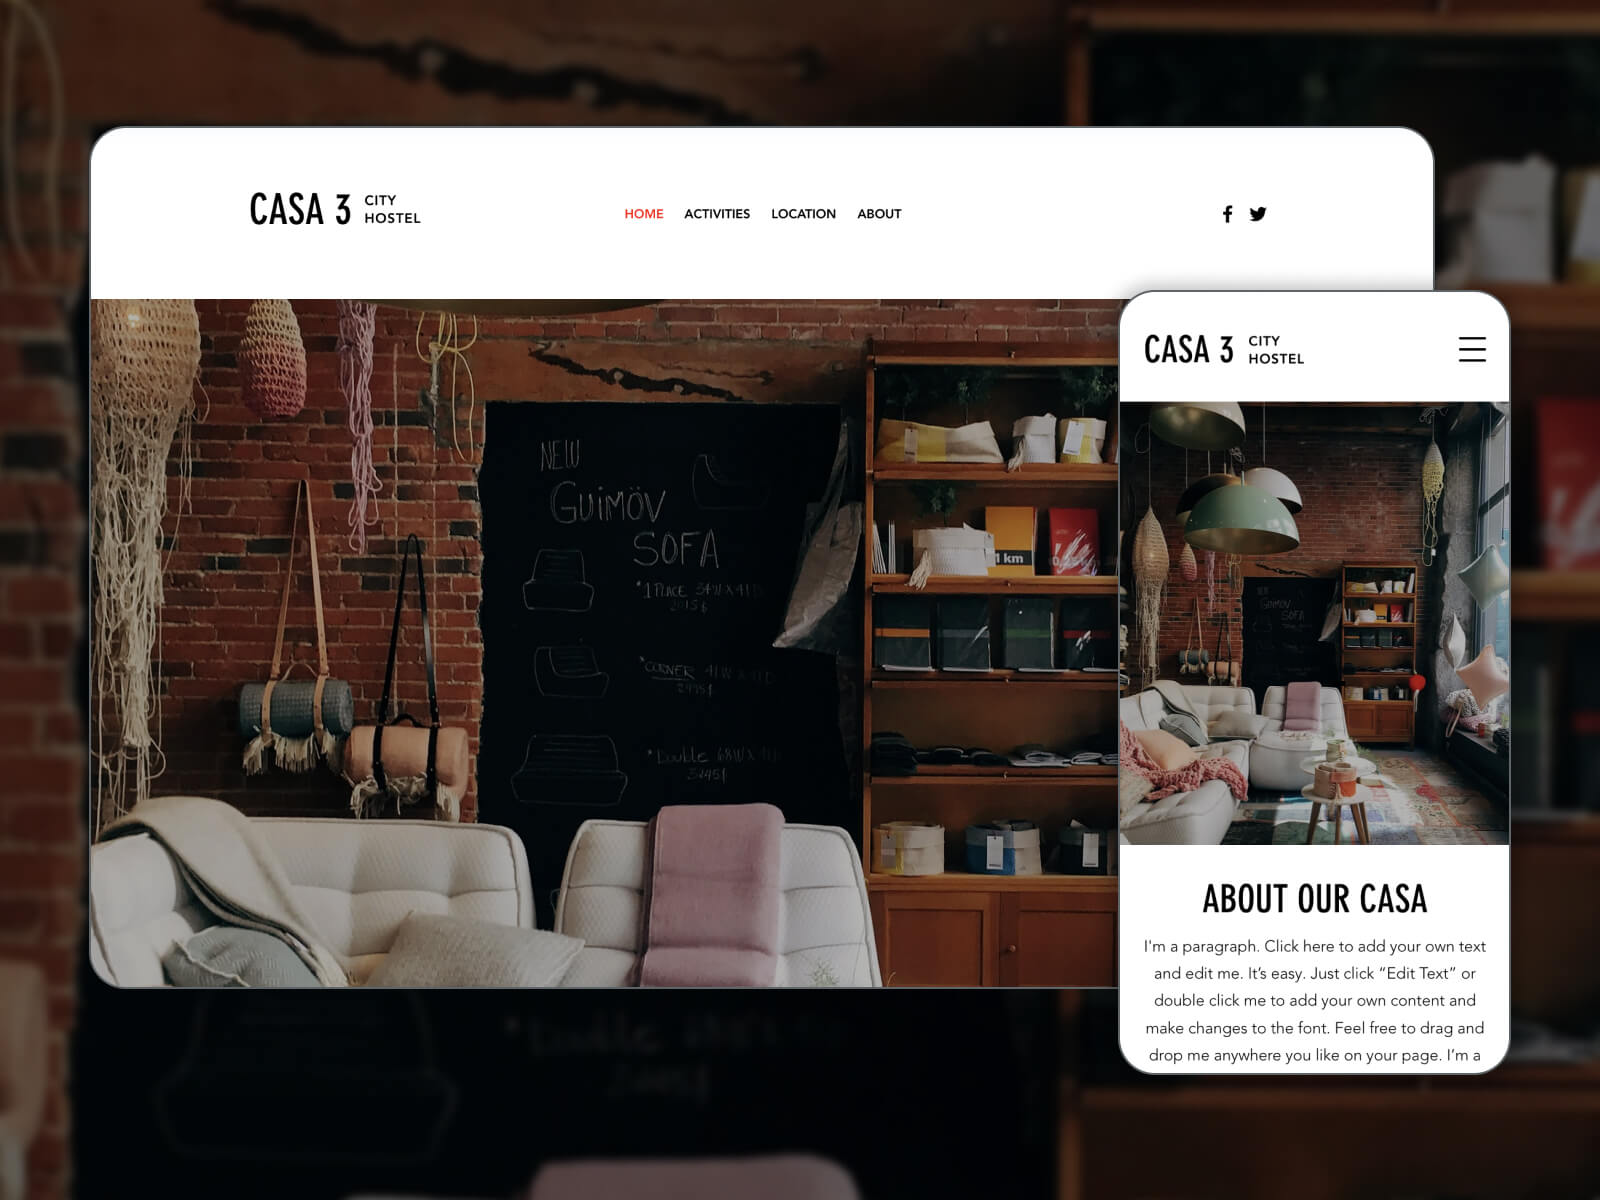 Image of CASA 3 CITY HOSTEL - easy-to-use and adaptable hotel booking WP theme in black, white, gray, dimgray, and darkslategray color combination.